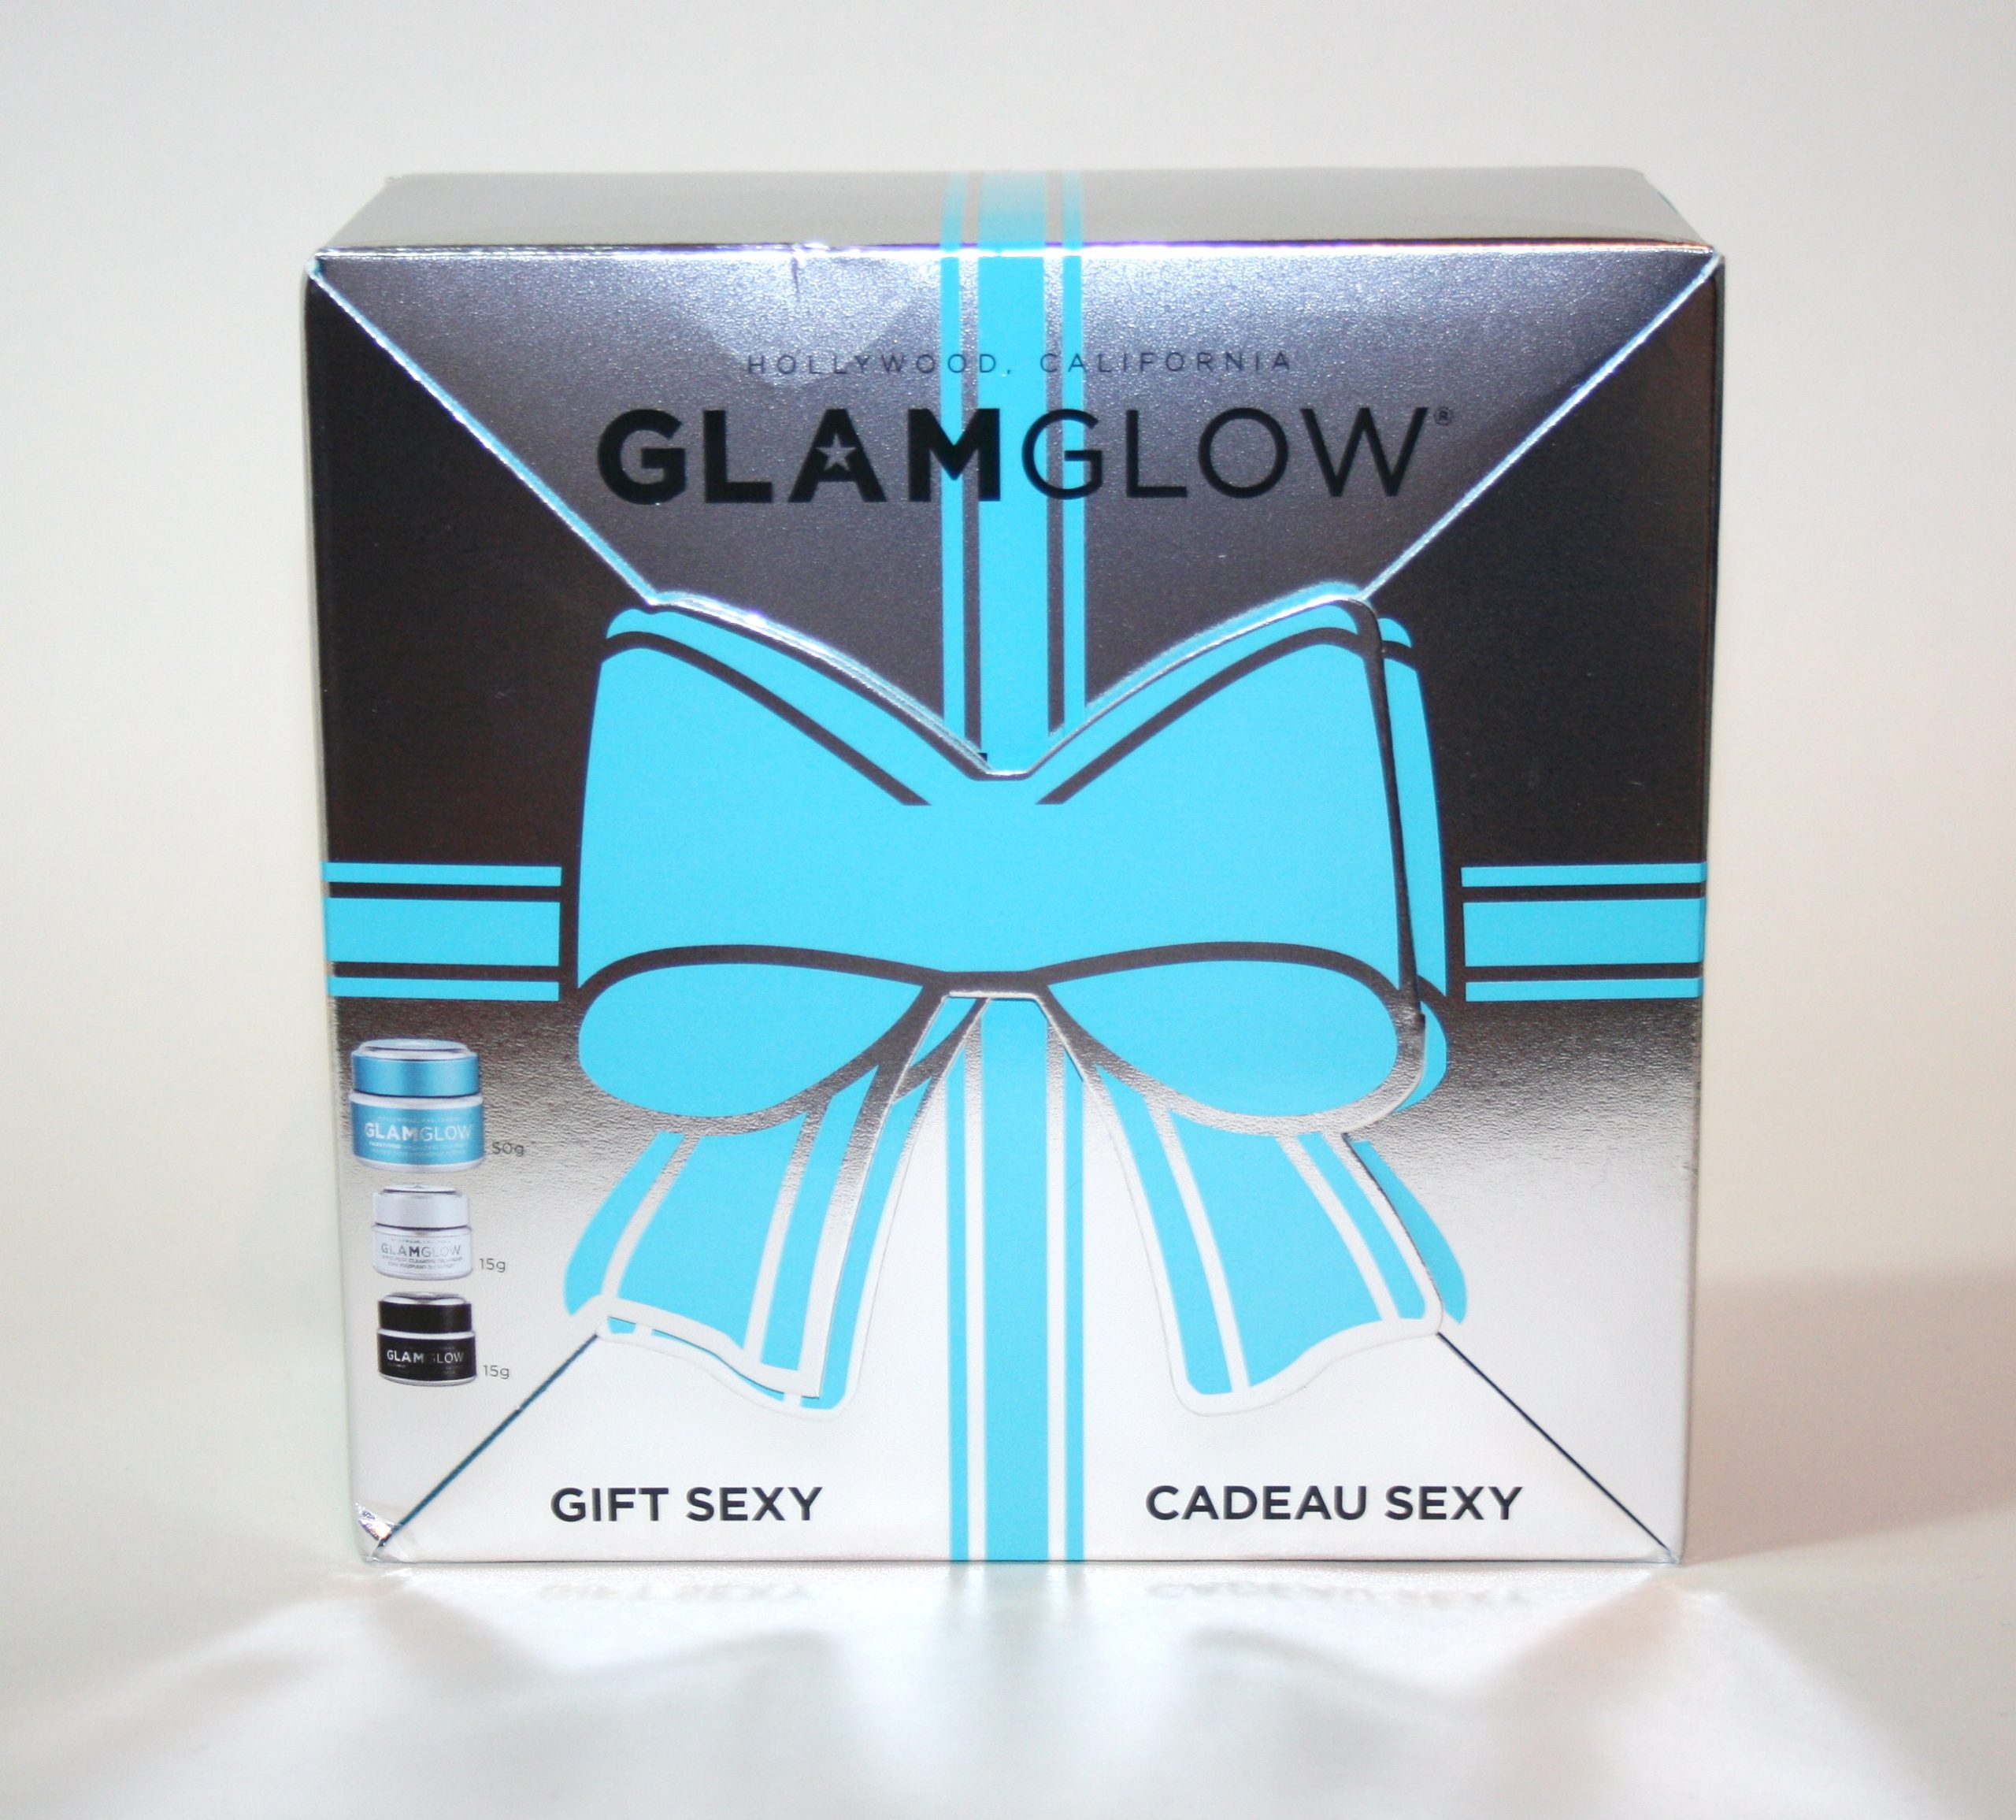 12 Gifts of Christmas: GlamGlow Gift Sexy